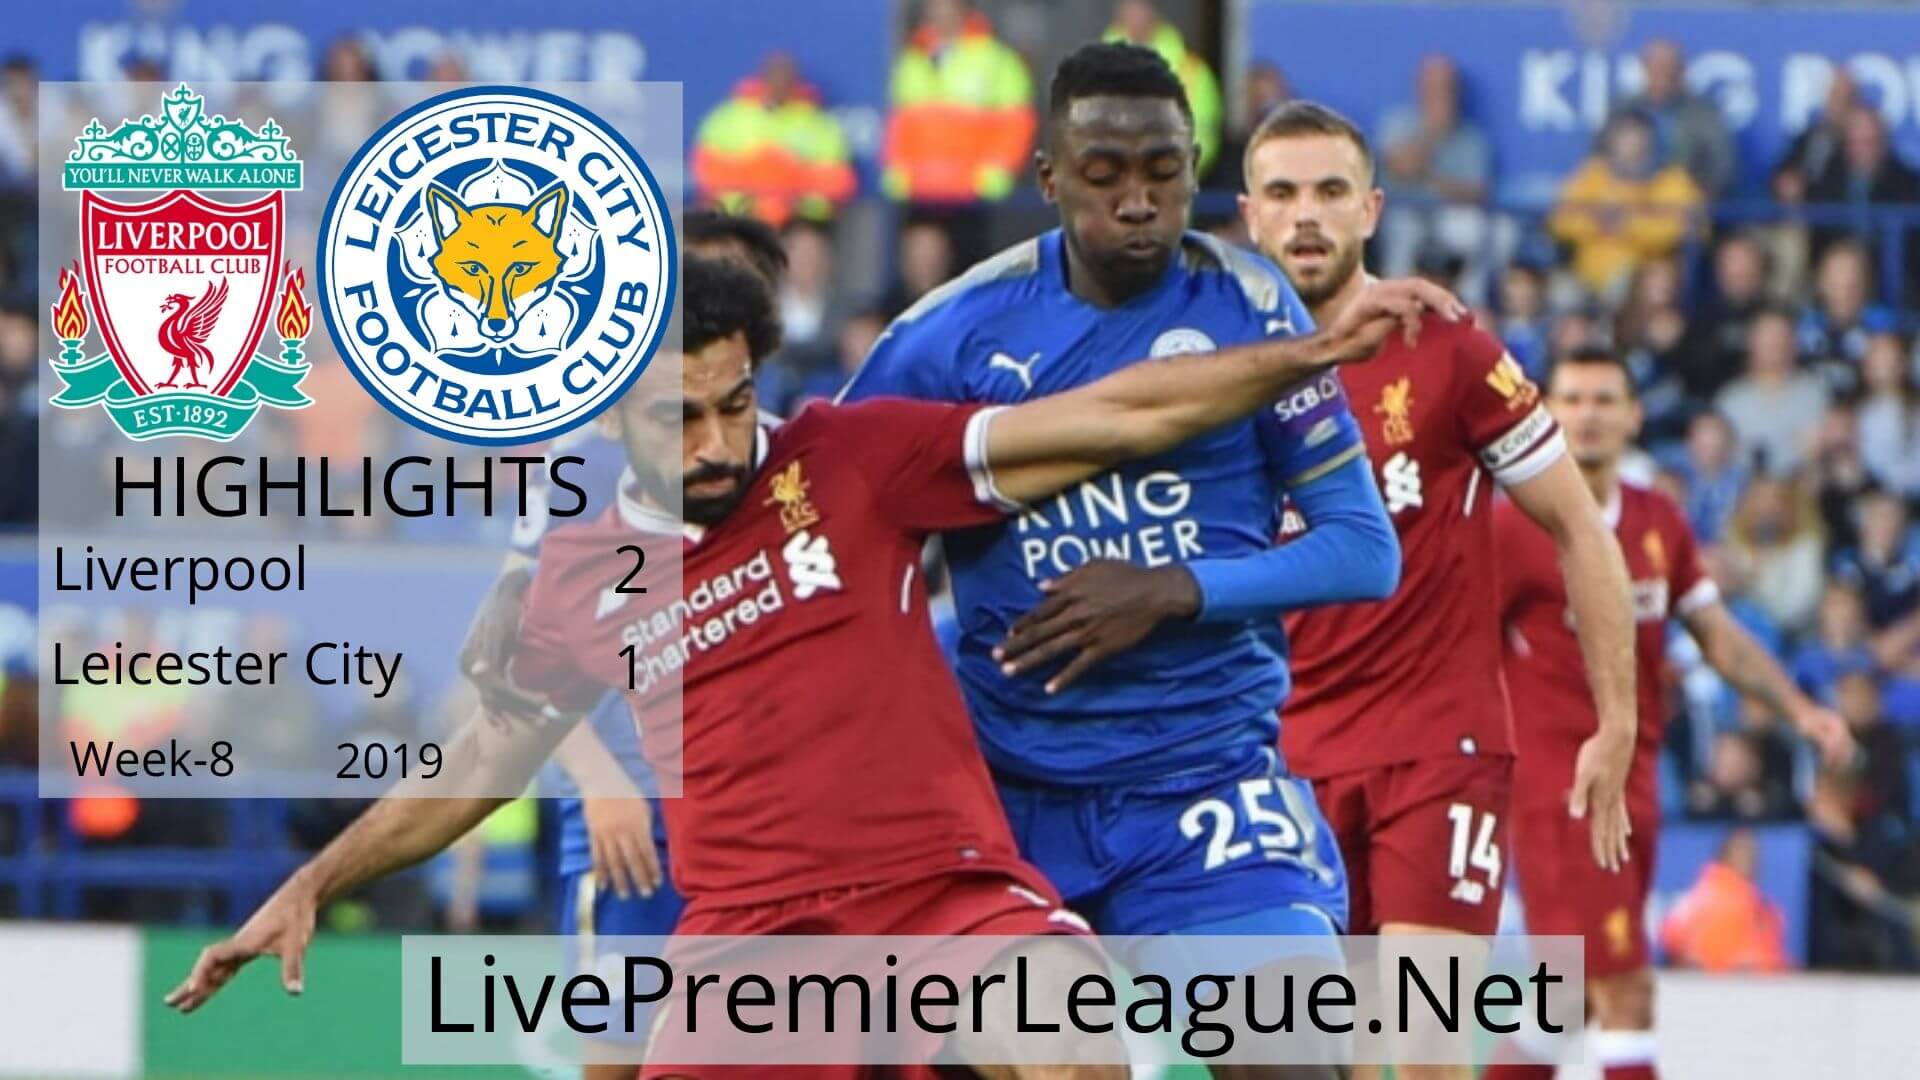 Liverpool vs Leicester City Highlights 2019 Week 8